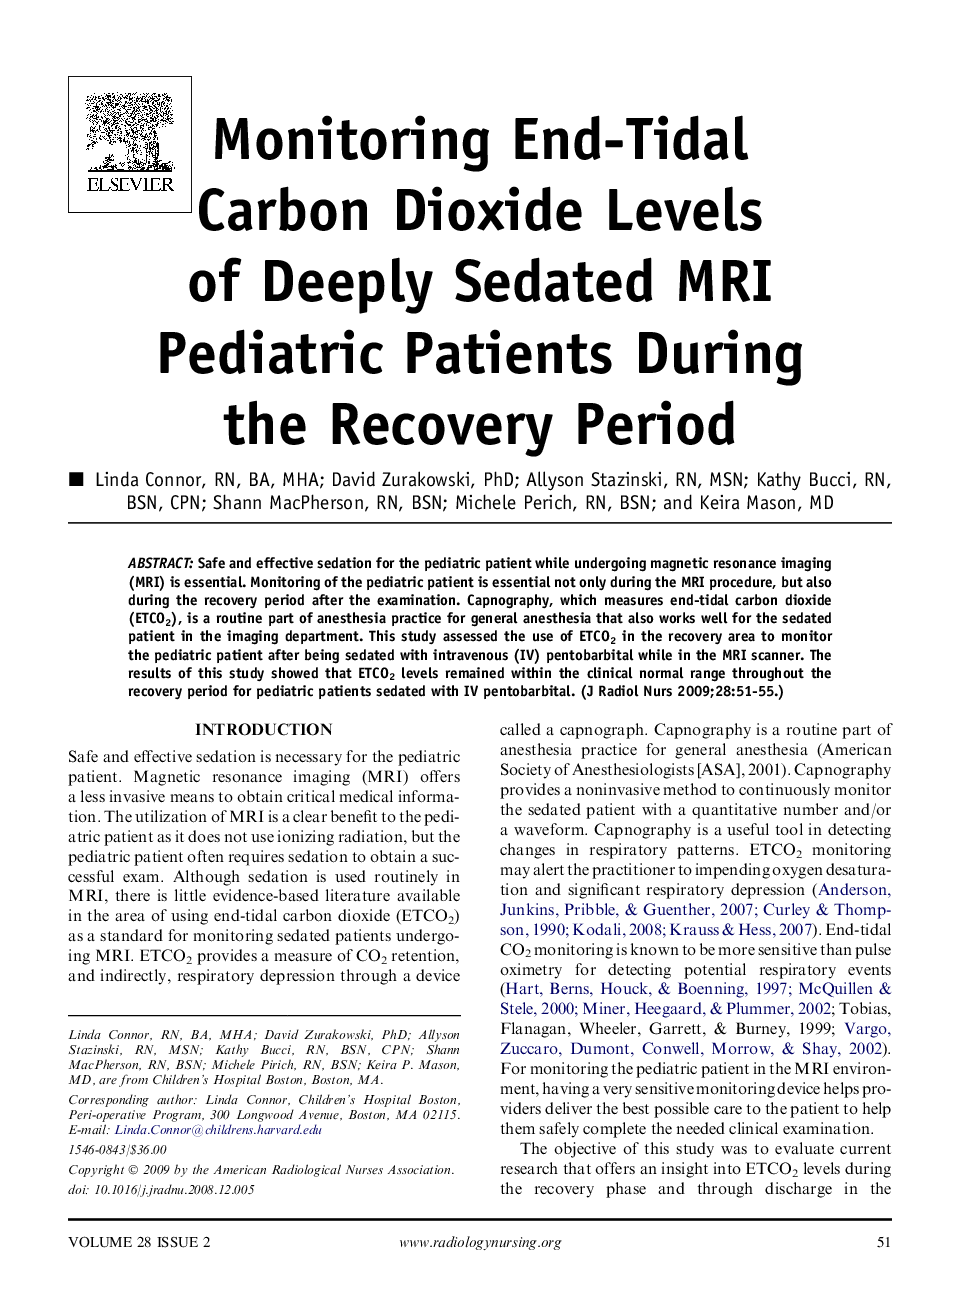 Monitoring End-Tidal Carbon Dioxide Levels of Deeply Sedated MRI Pediatric Patients During the Recovery Period